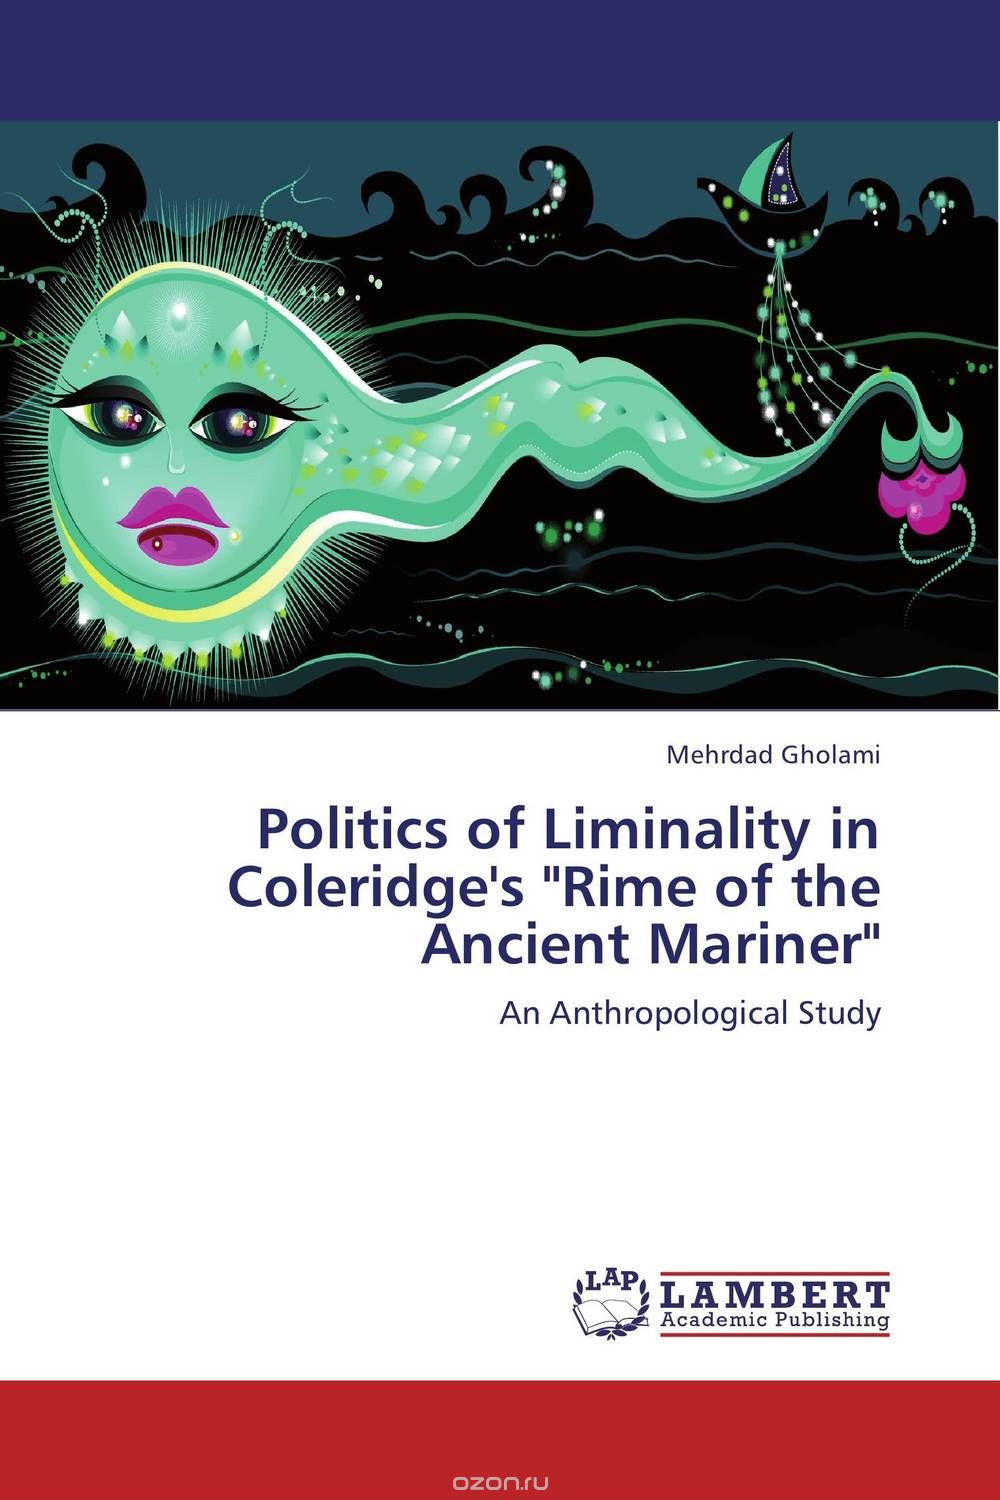 Politics of Liminality in Coleridge's "Rime of the Ancient Mariner"